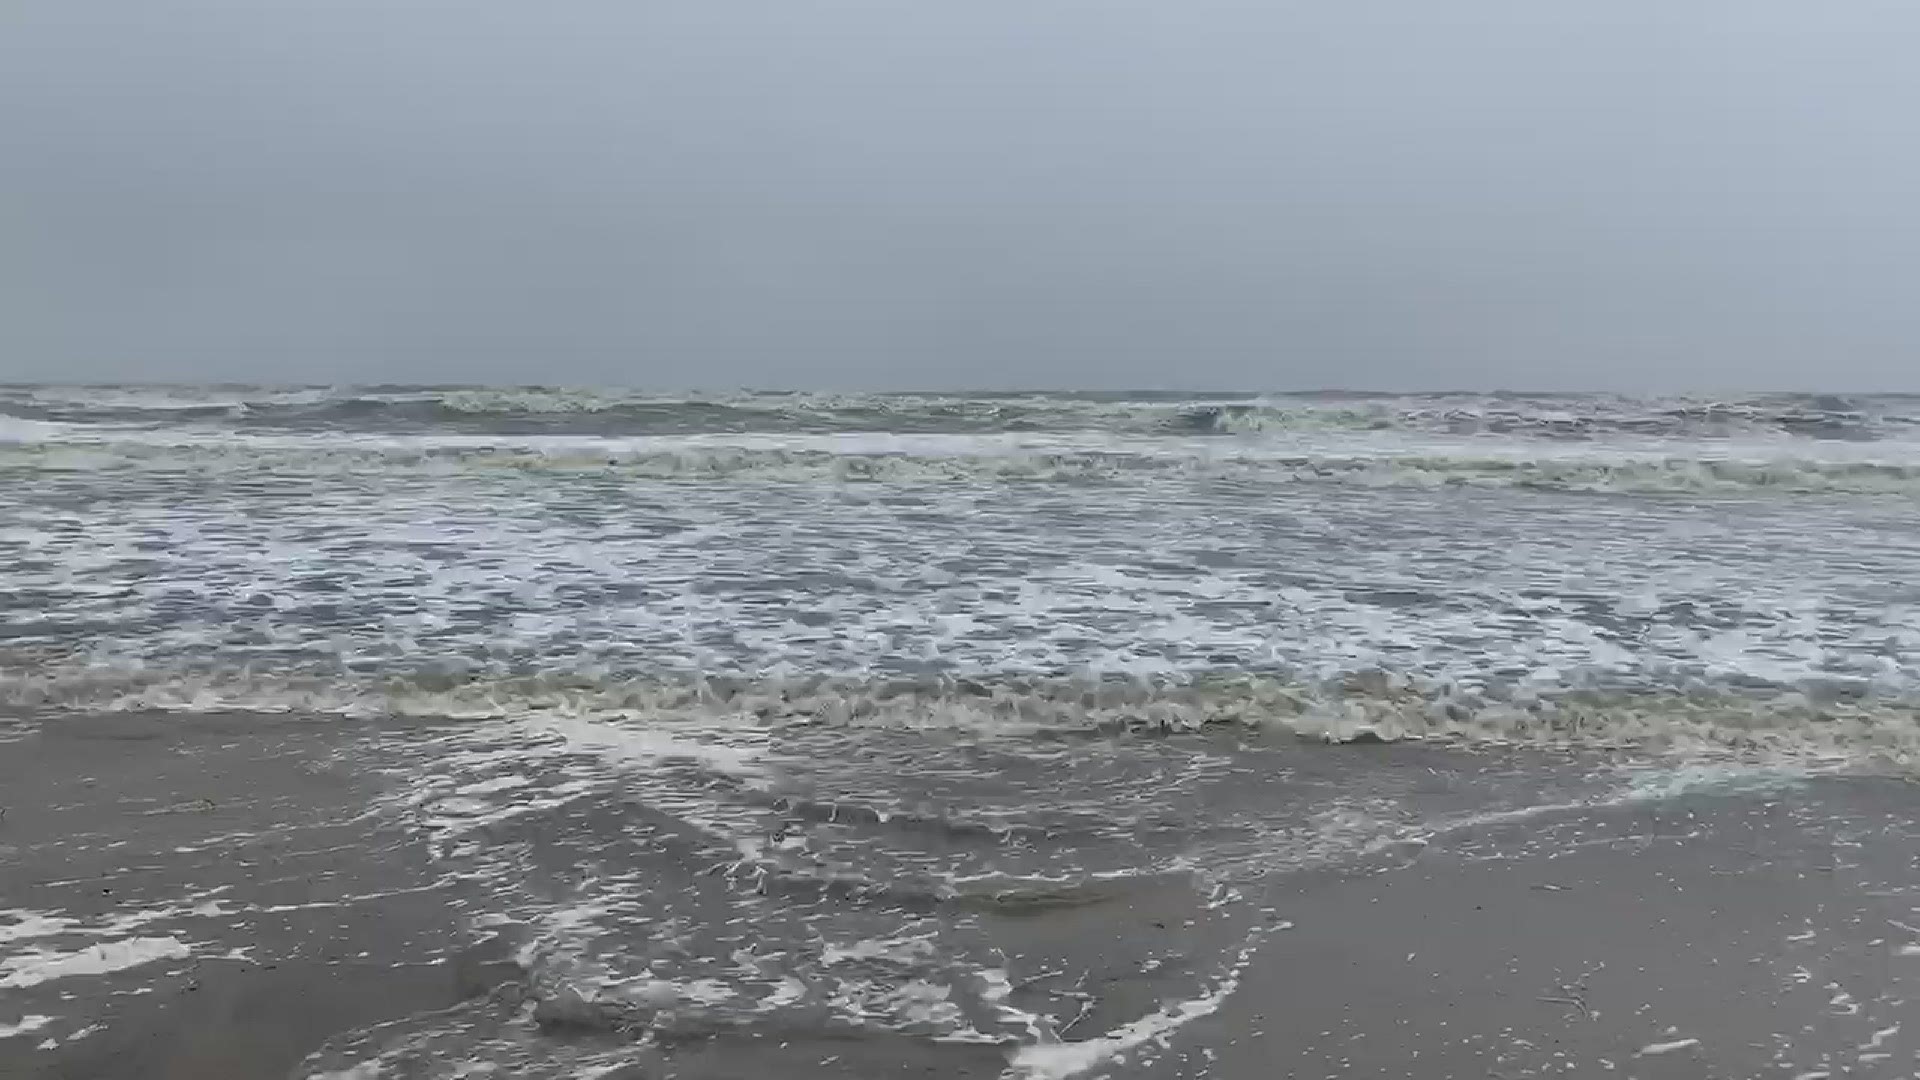 Waves on Grand Isle ahead of Tropical Storm Cristobal
Credit: Ricky templet